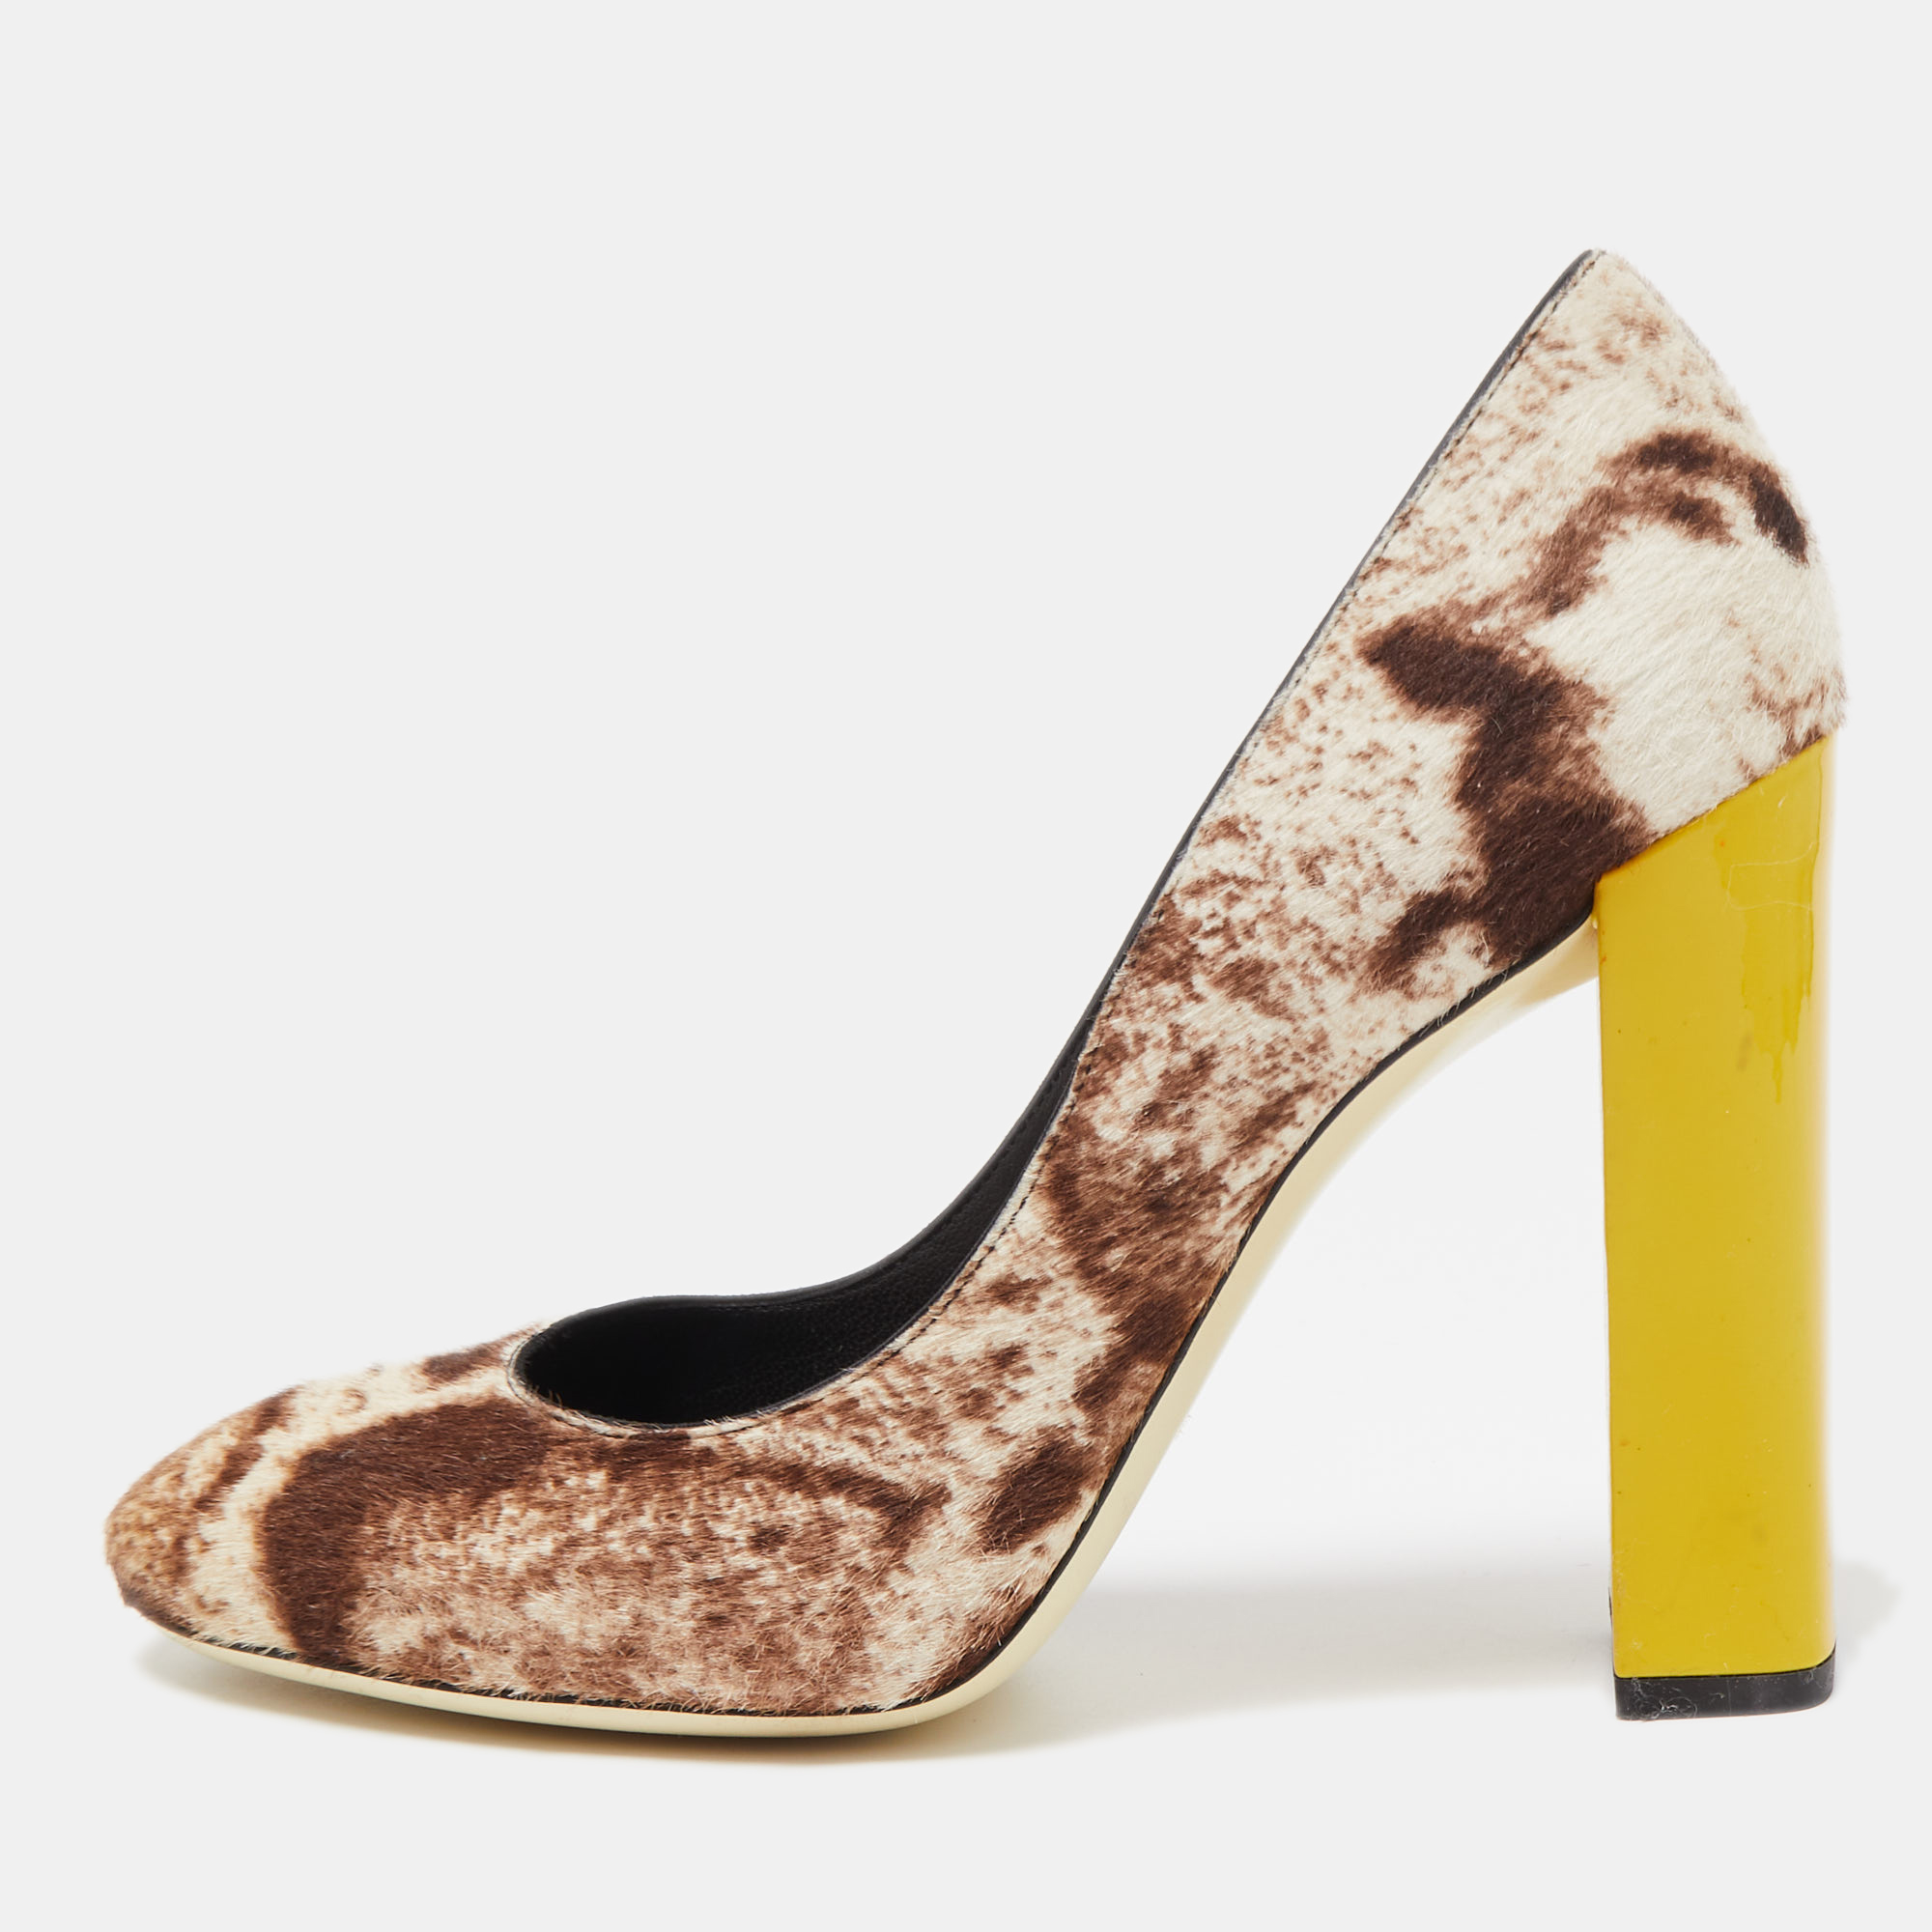 The fashion house's tradition of excellence coupled with modern design sensibilities works to make these pumps a fabulous choice. Theyll help you deliver a chic look with ease.